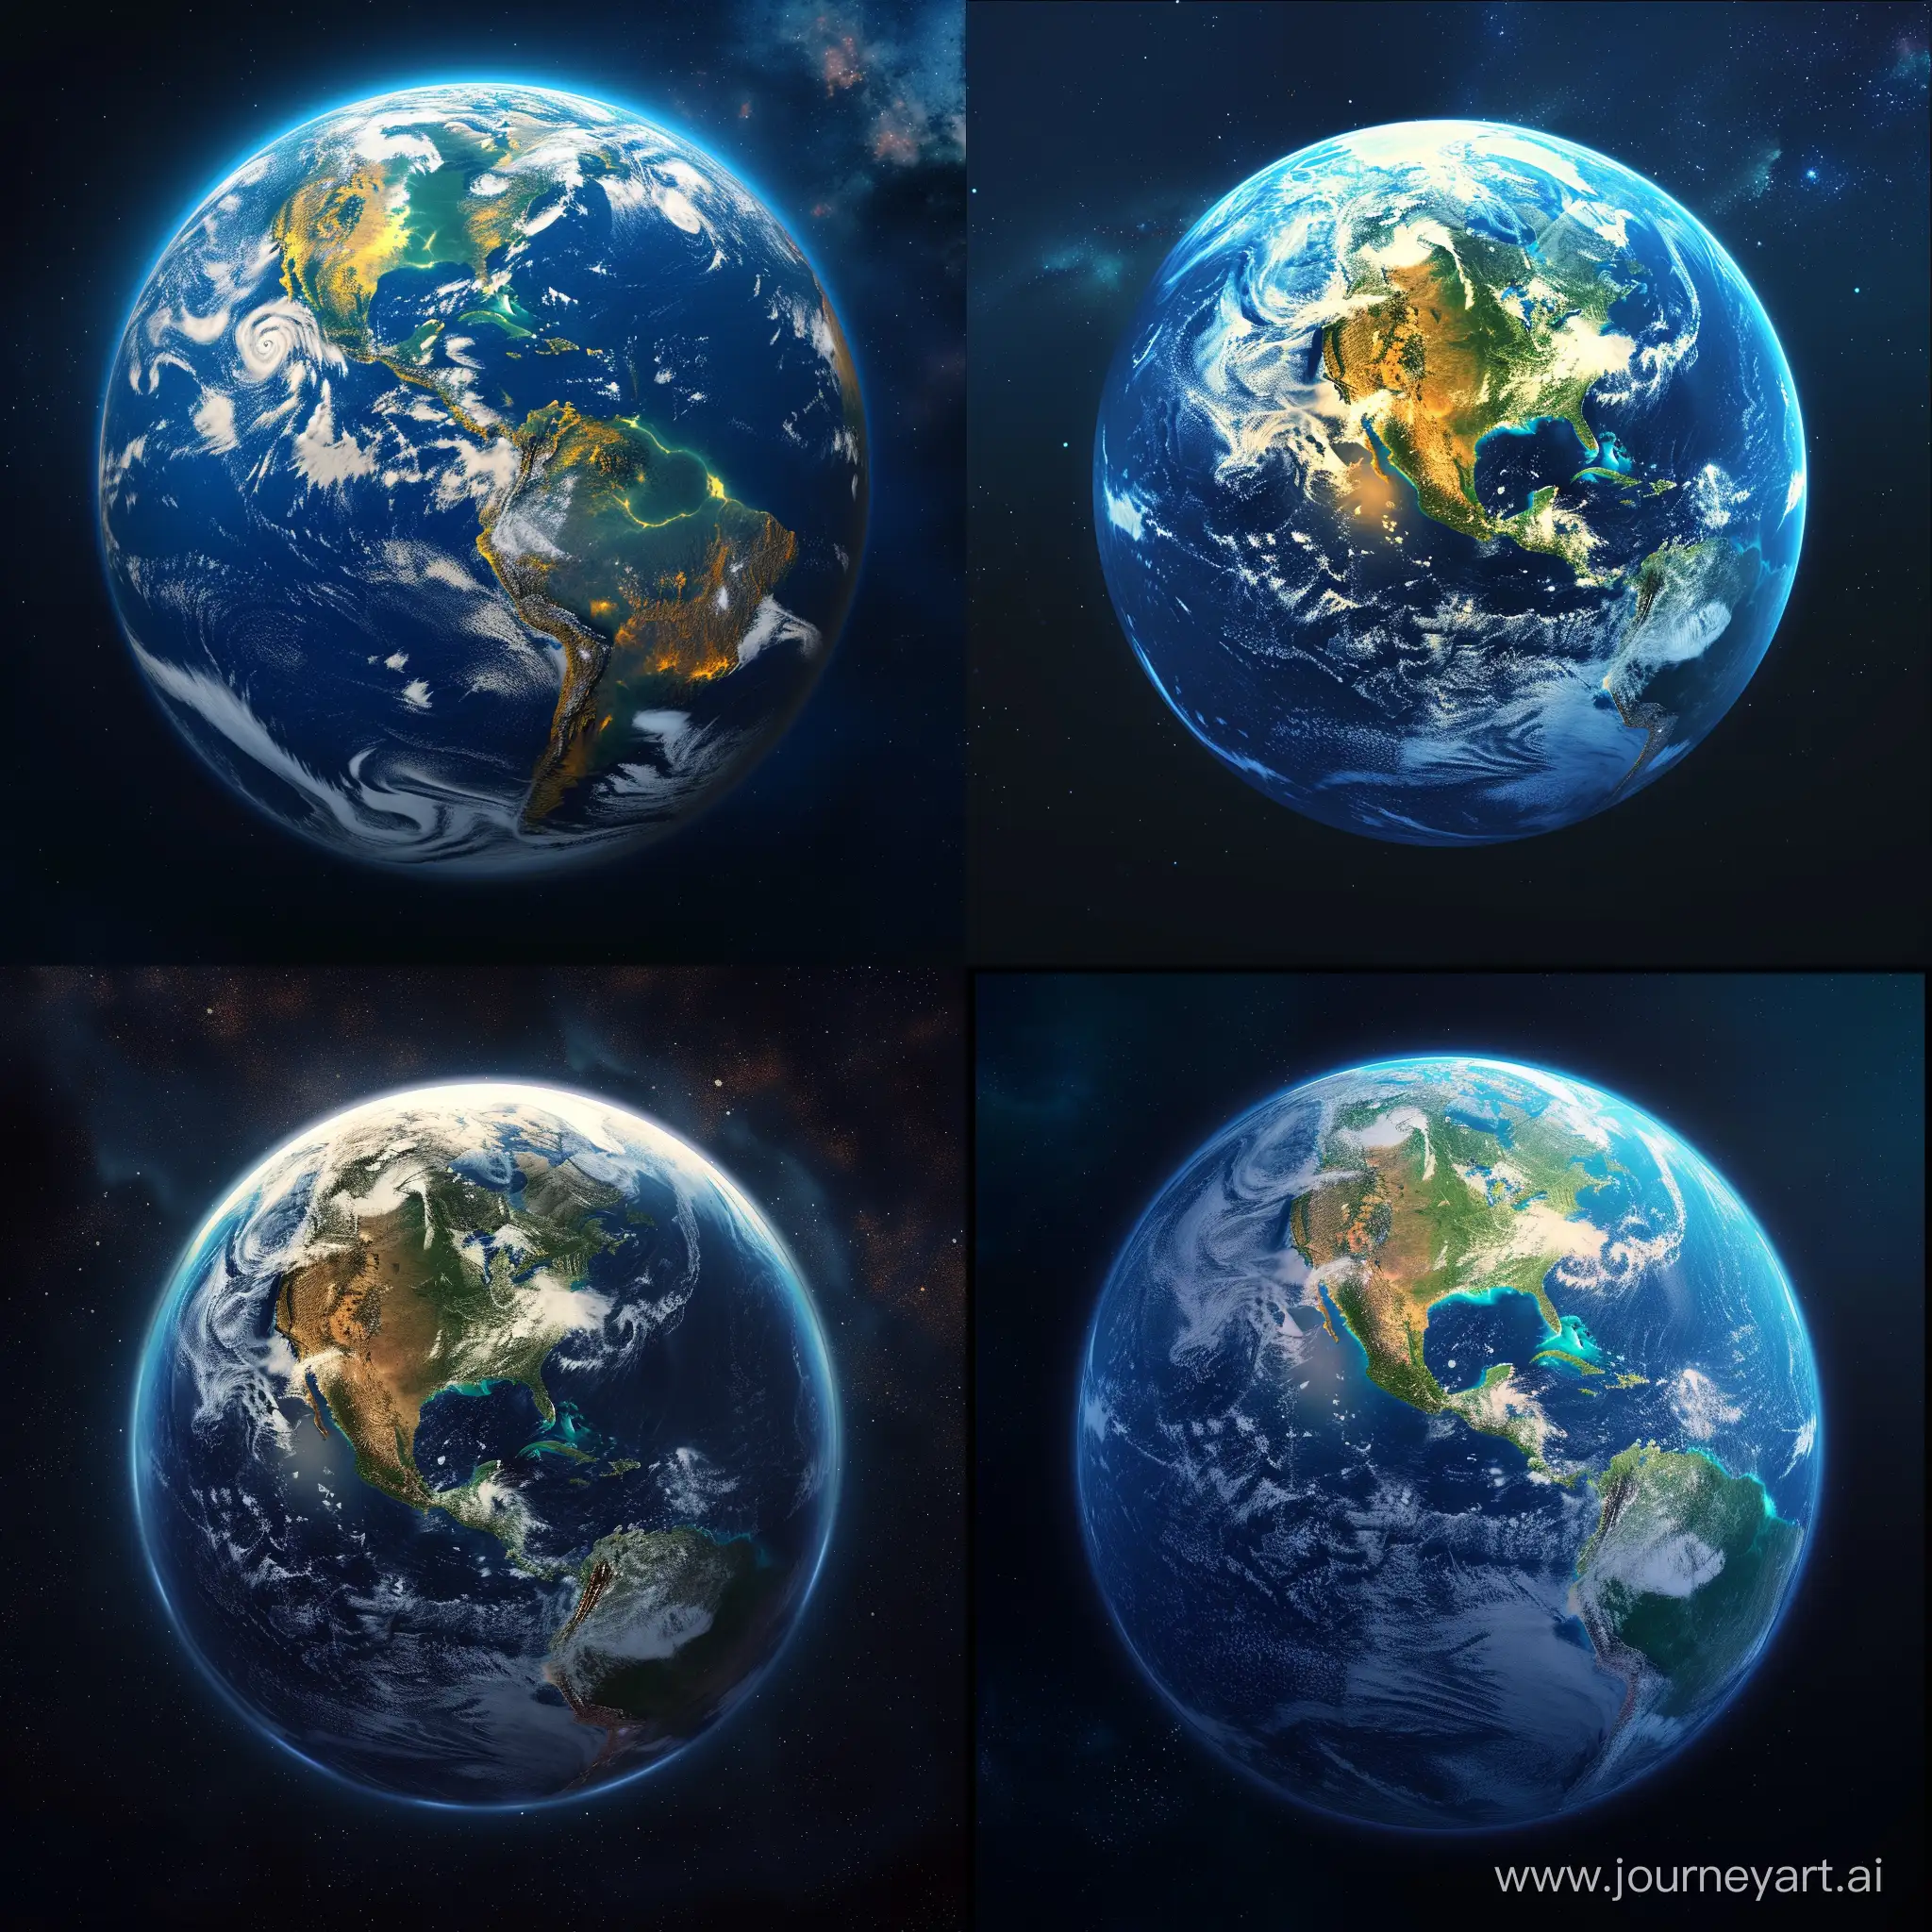 Captivating-View-of-Earth-Detailed-Continents-and-Oceans-in-Soft-Lighting